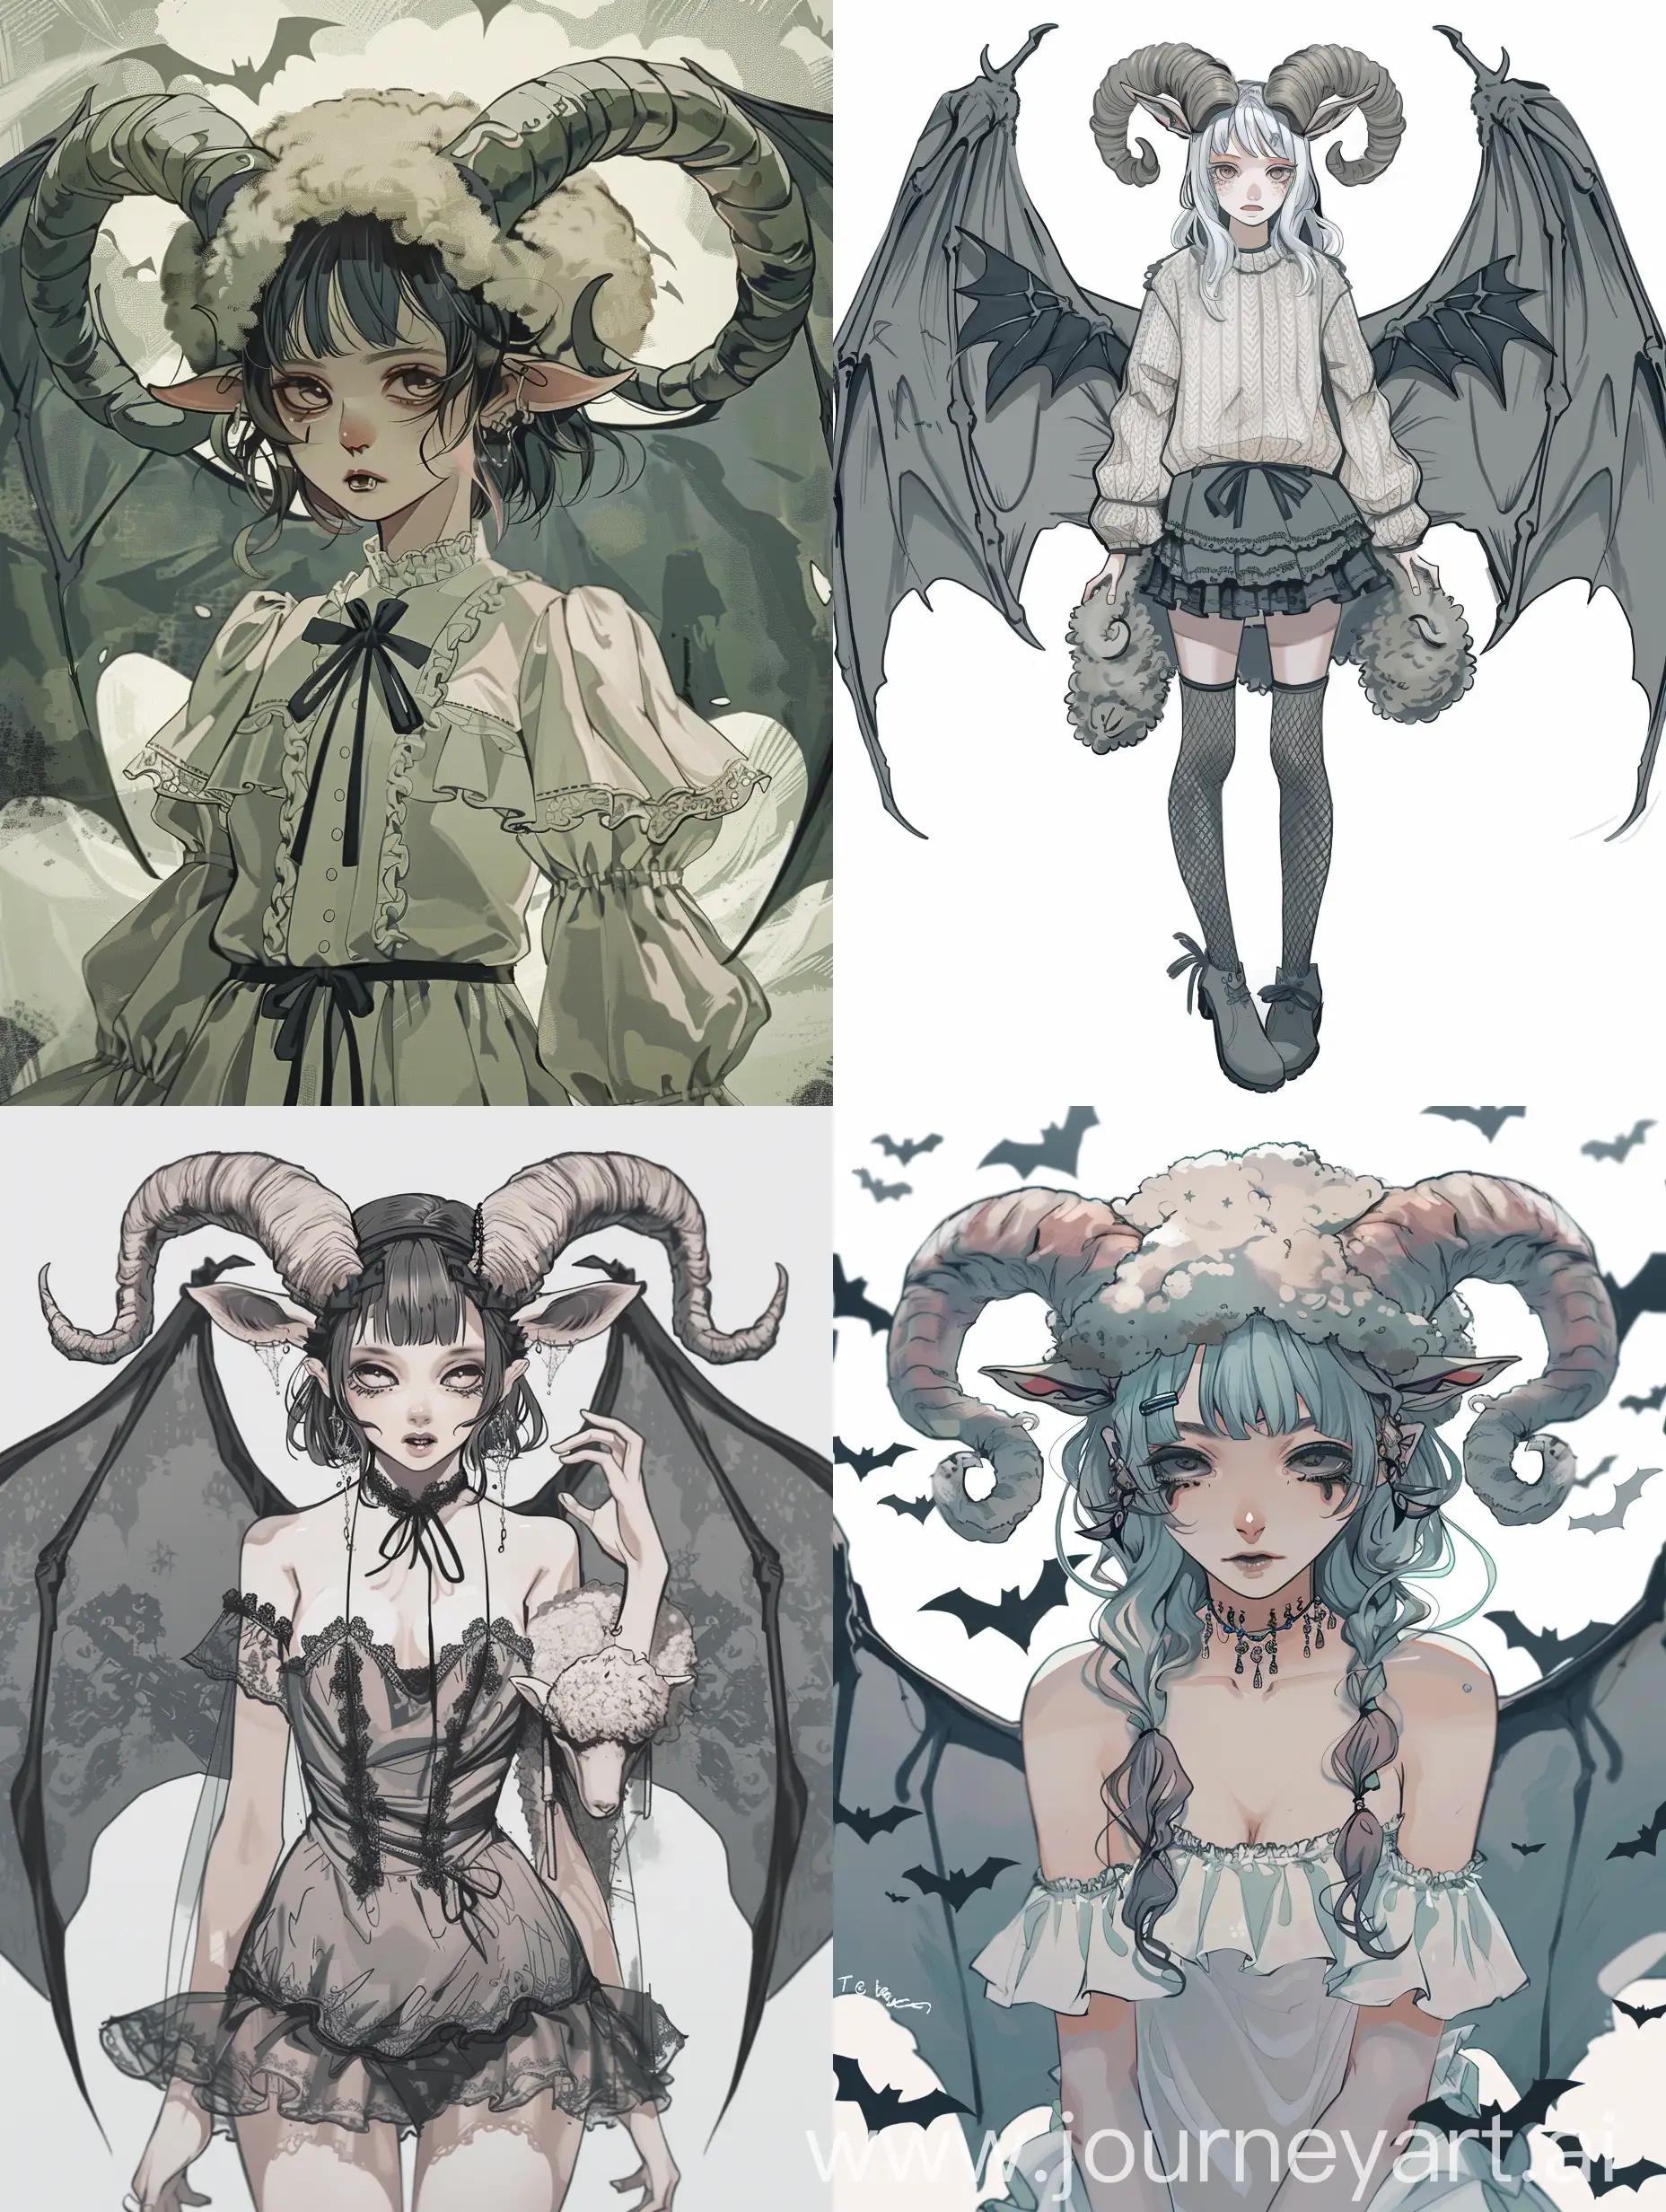 Anime-Girl-with-Sheep-Horns-and-Bat-Wings